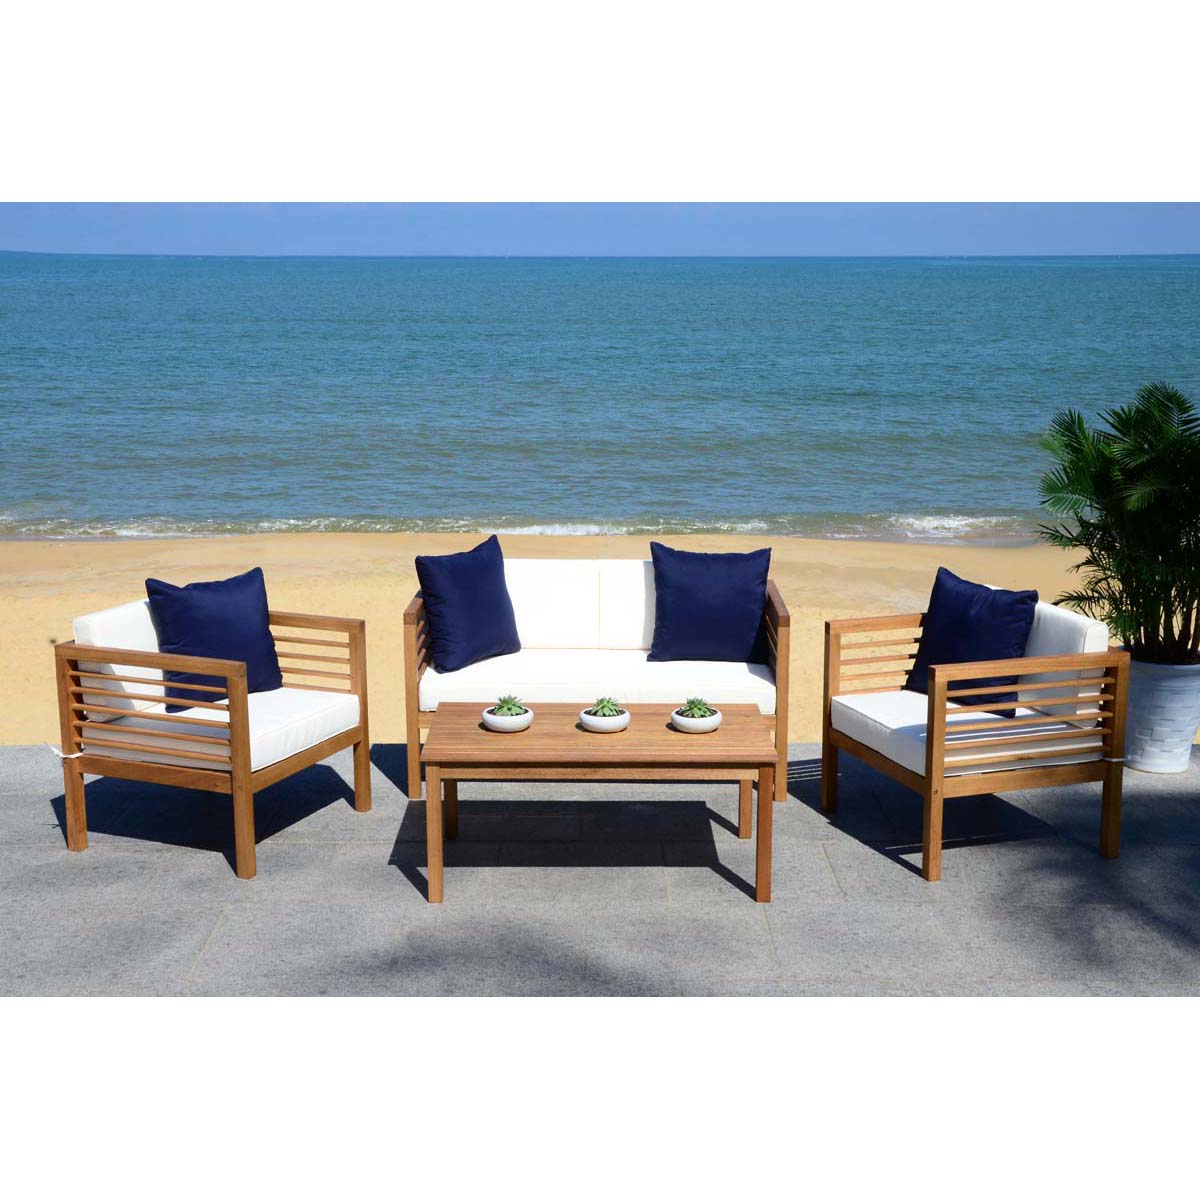 Safavieh Alda 4 Pc Outdoor Set With Accent Pillows , PAT7033 - Natural/Beige/Navy